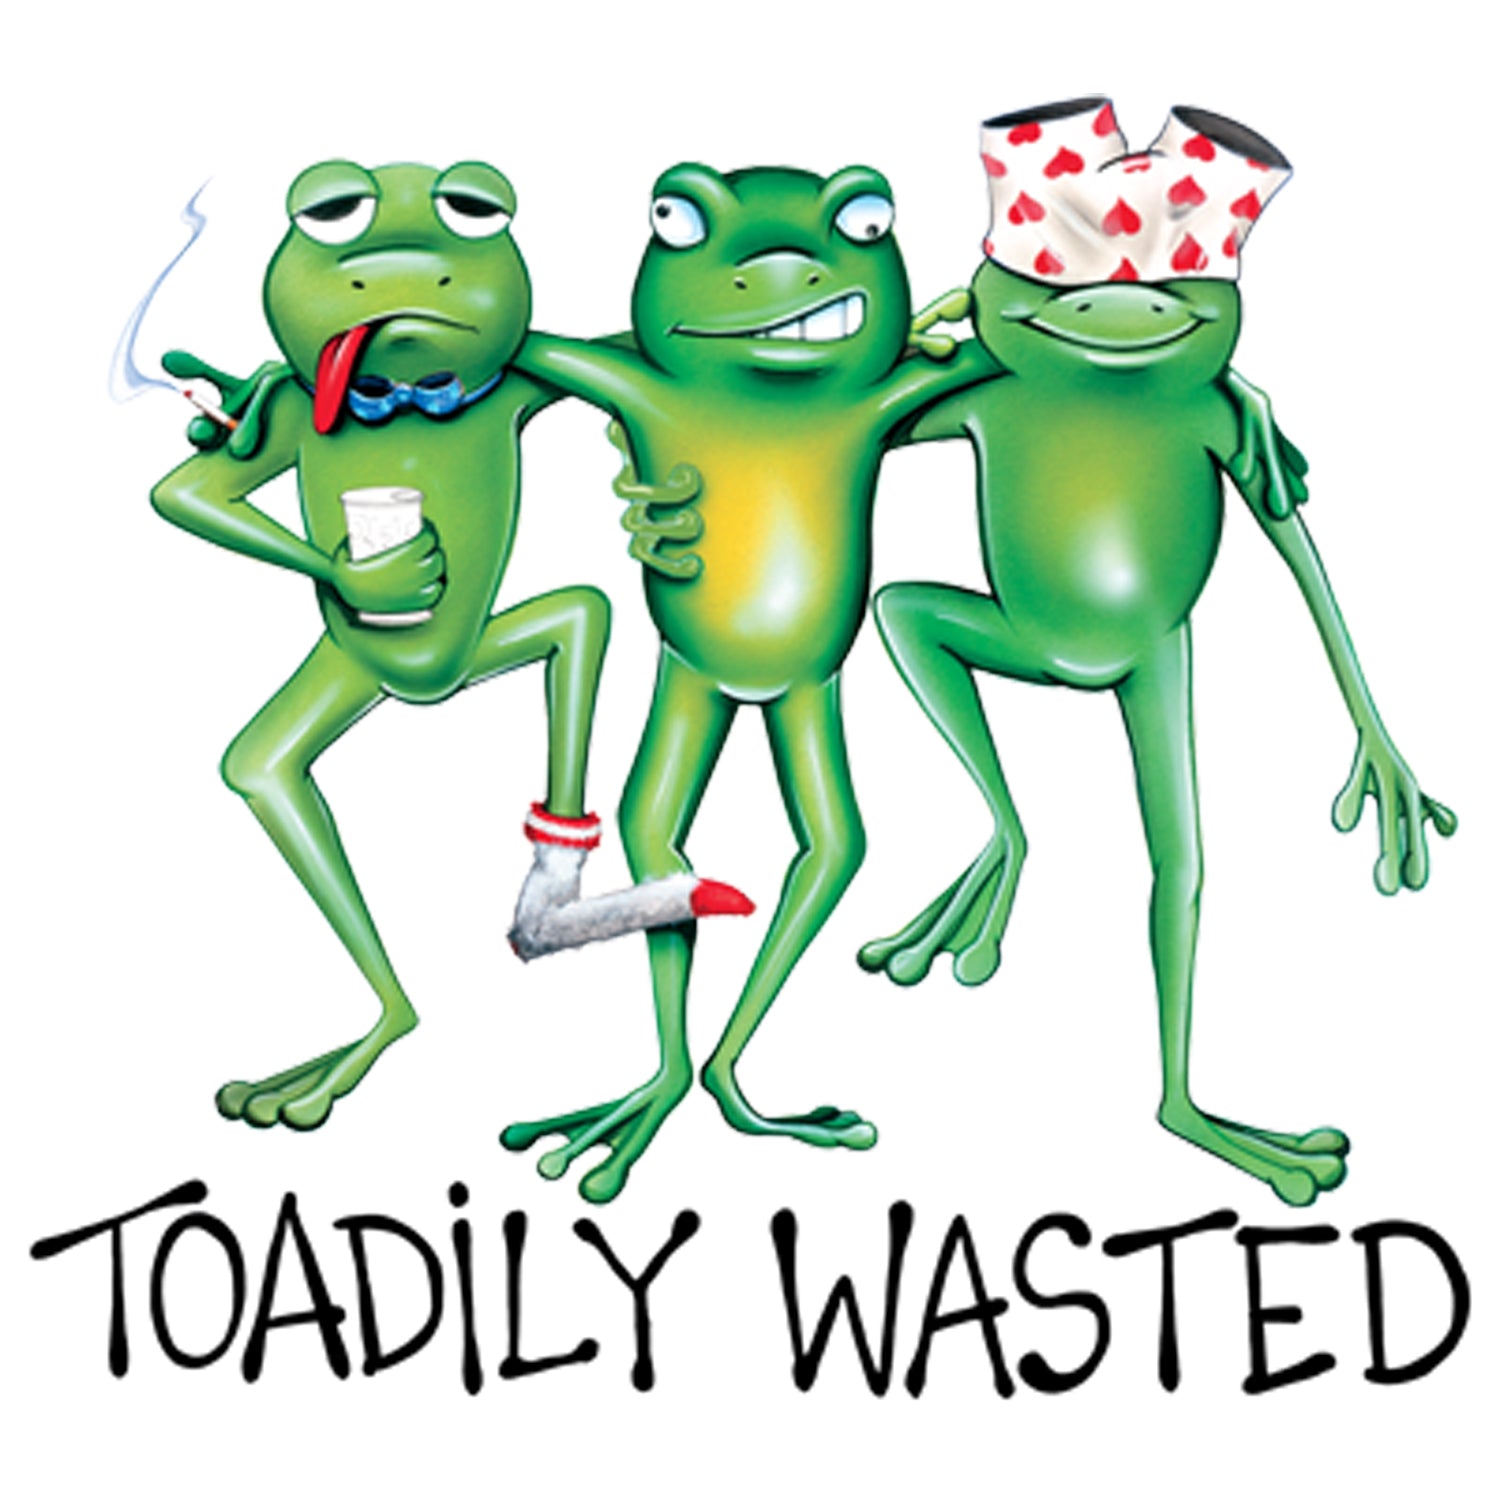 Toadily Wasted Frog Trio Printed T-Shirt-White